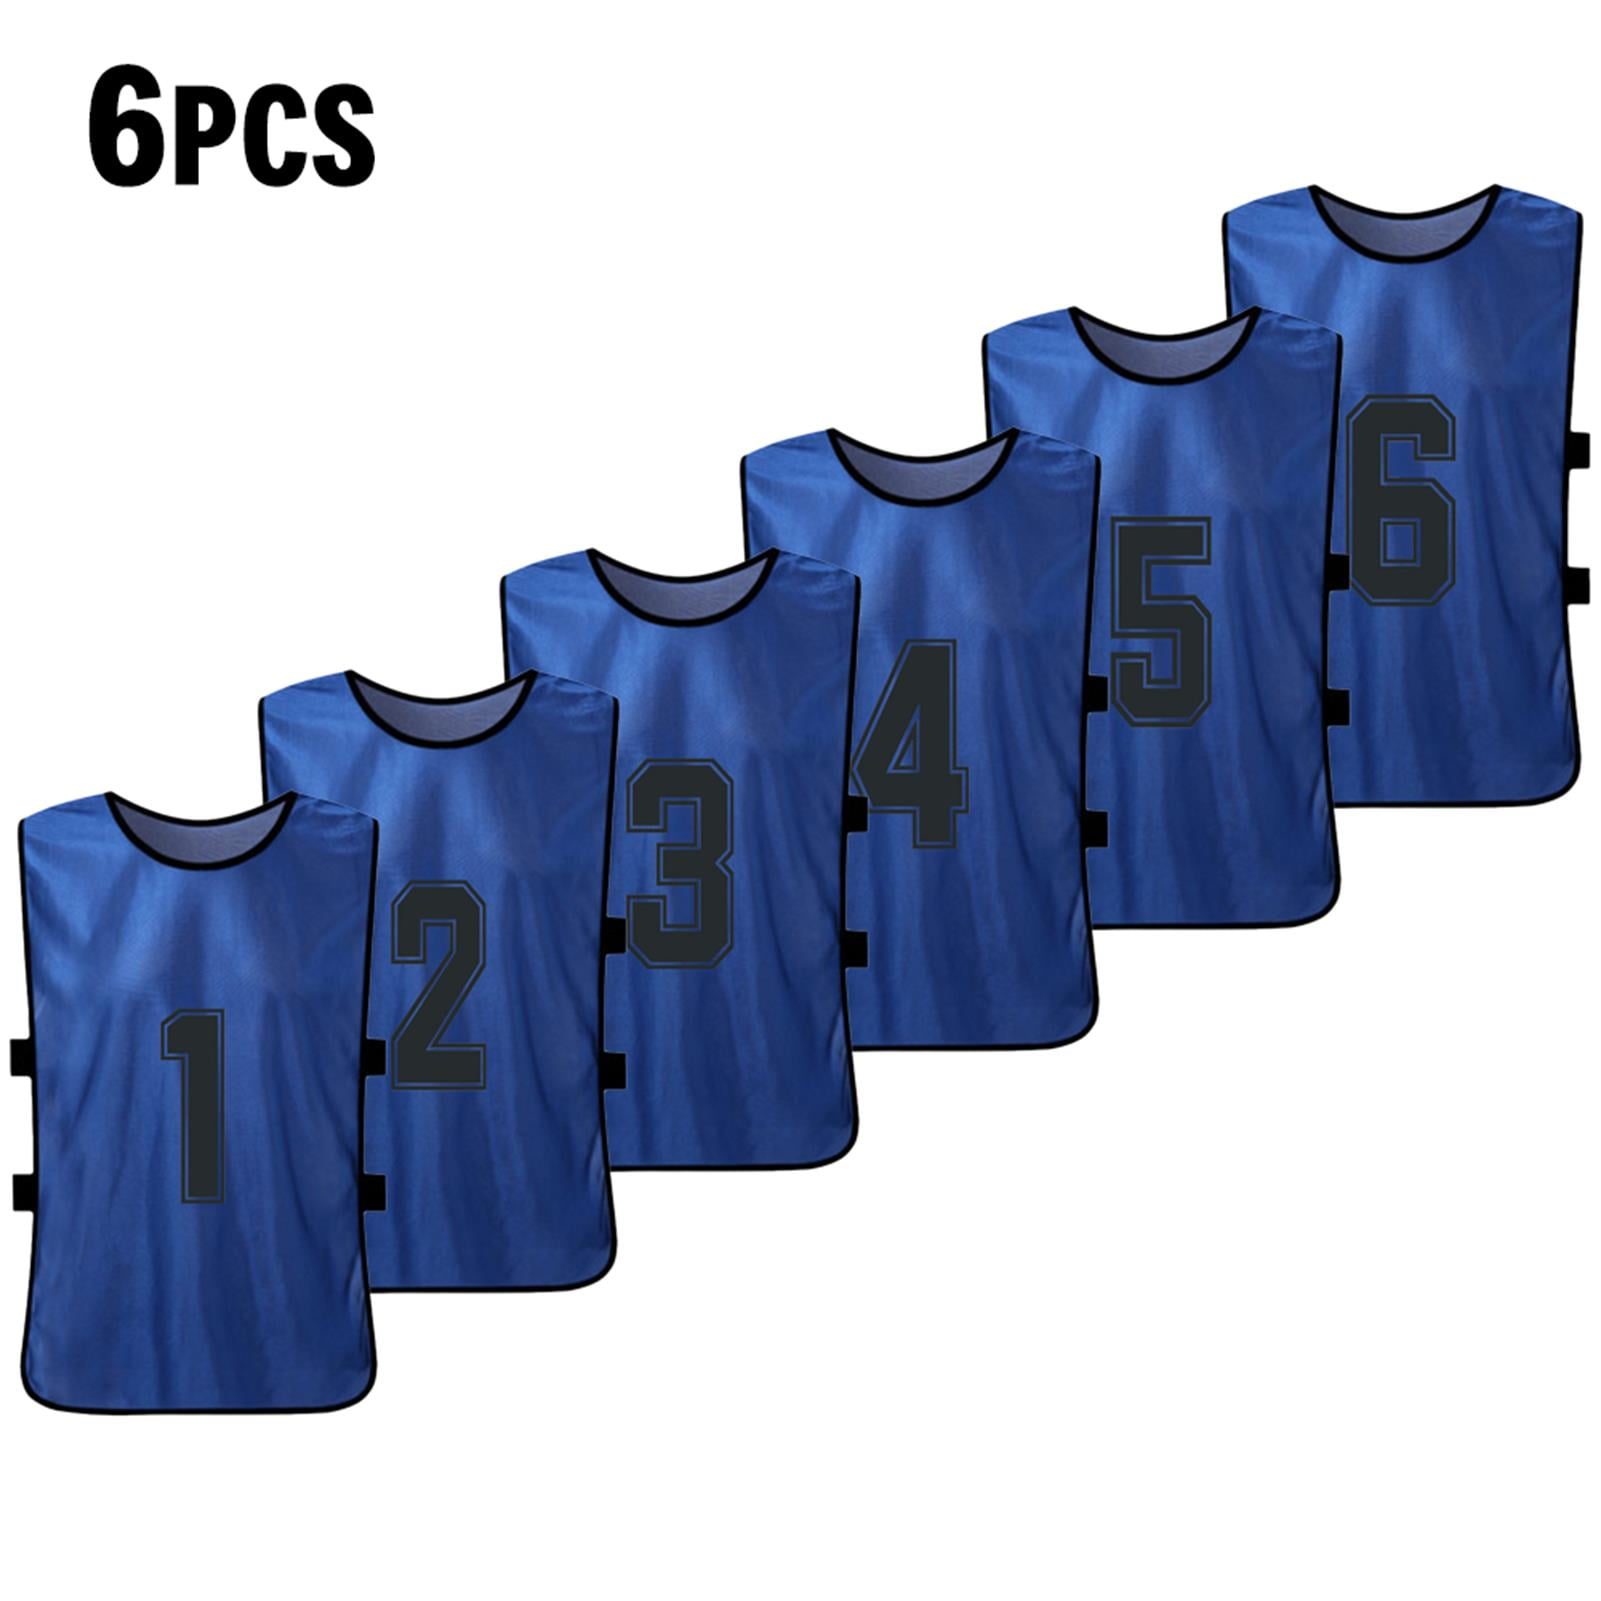 6 Scrimmage Vests Soccer Basketball Team Training Youth Adult Pinnies Jerseys 